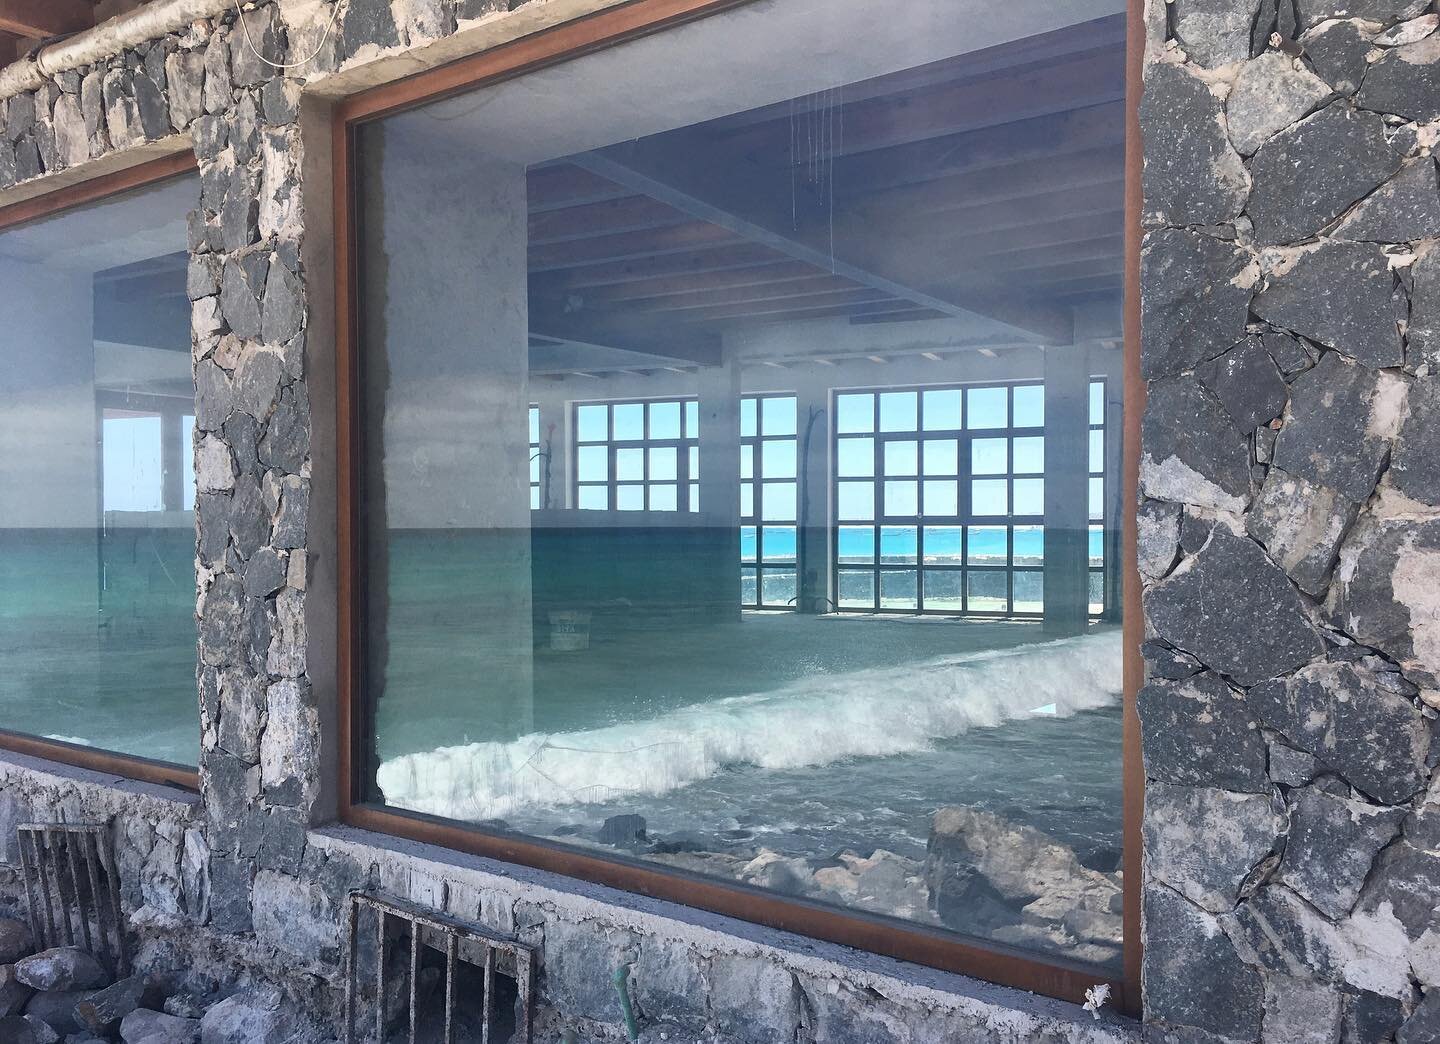 Photo of the left window taken from the outside of the restaurant, with the reflection of the beach.